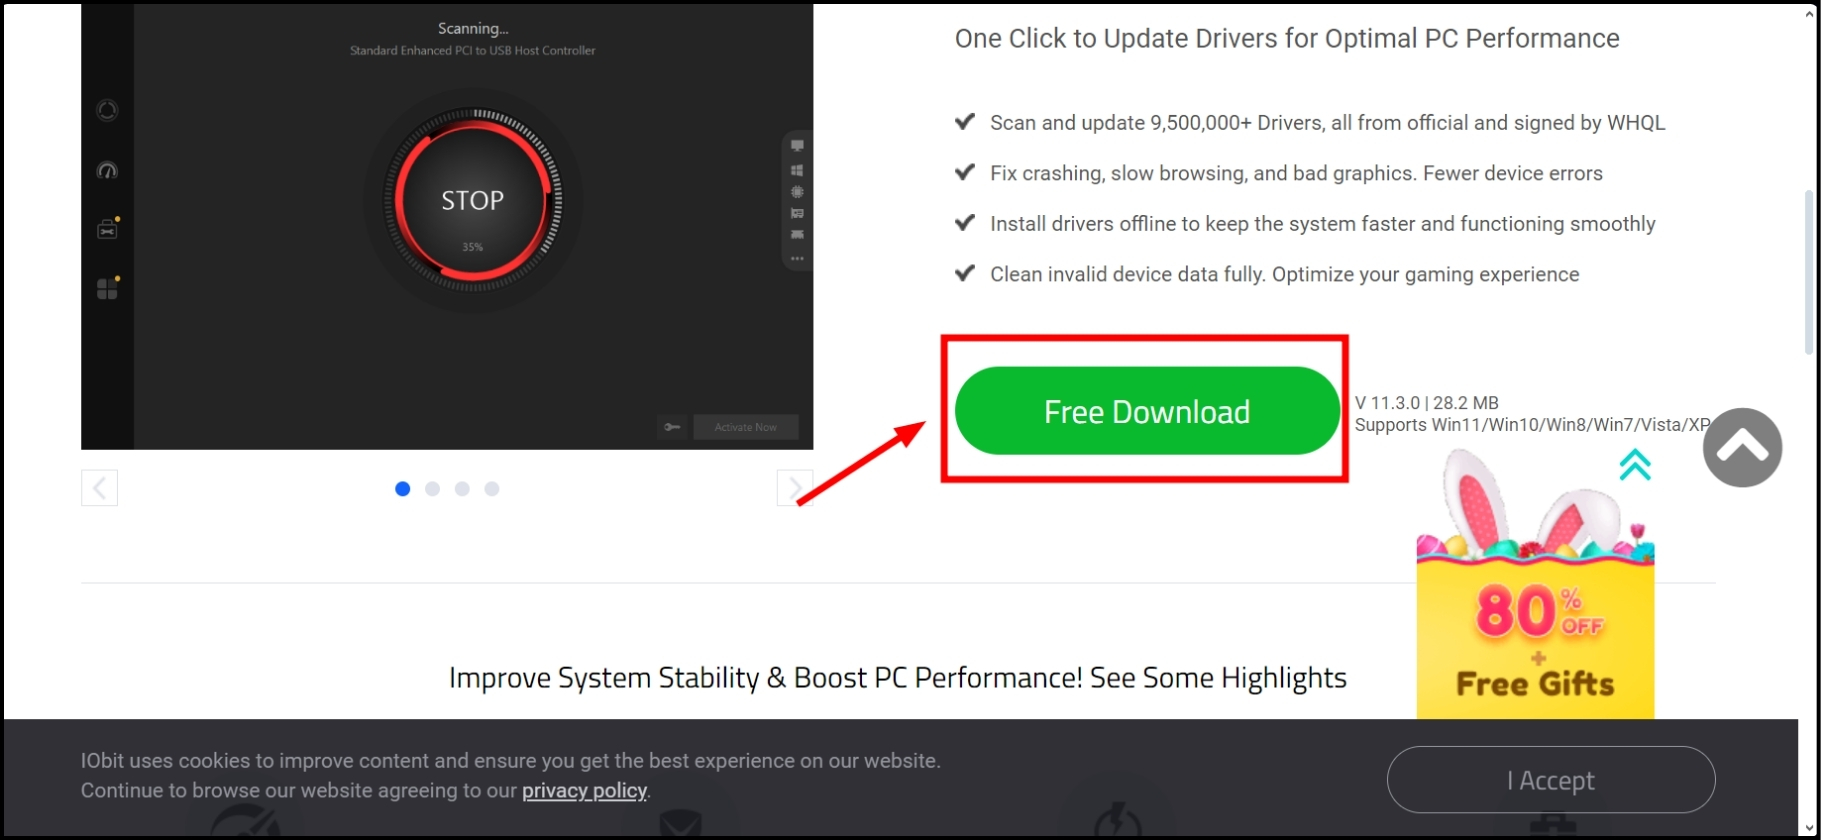 Download the software